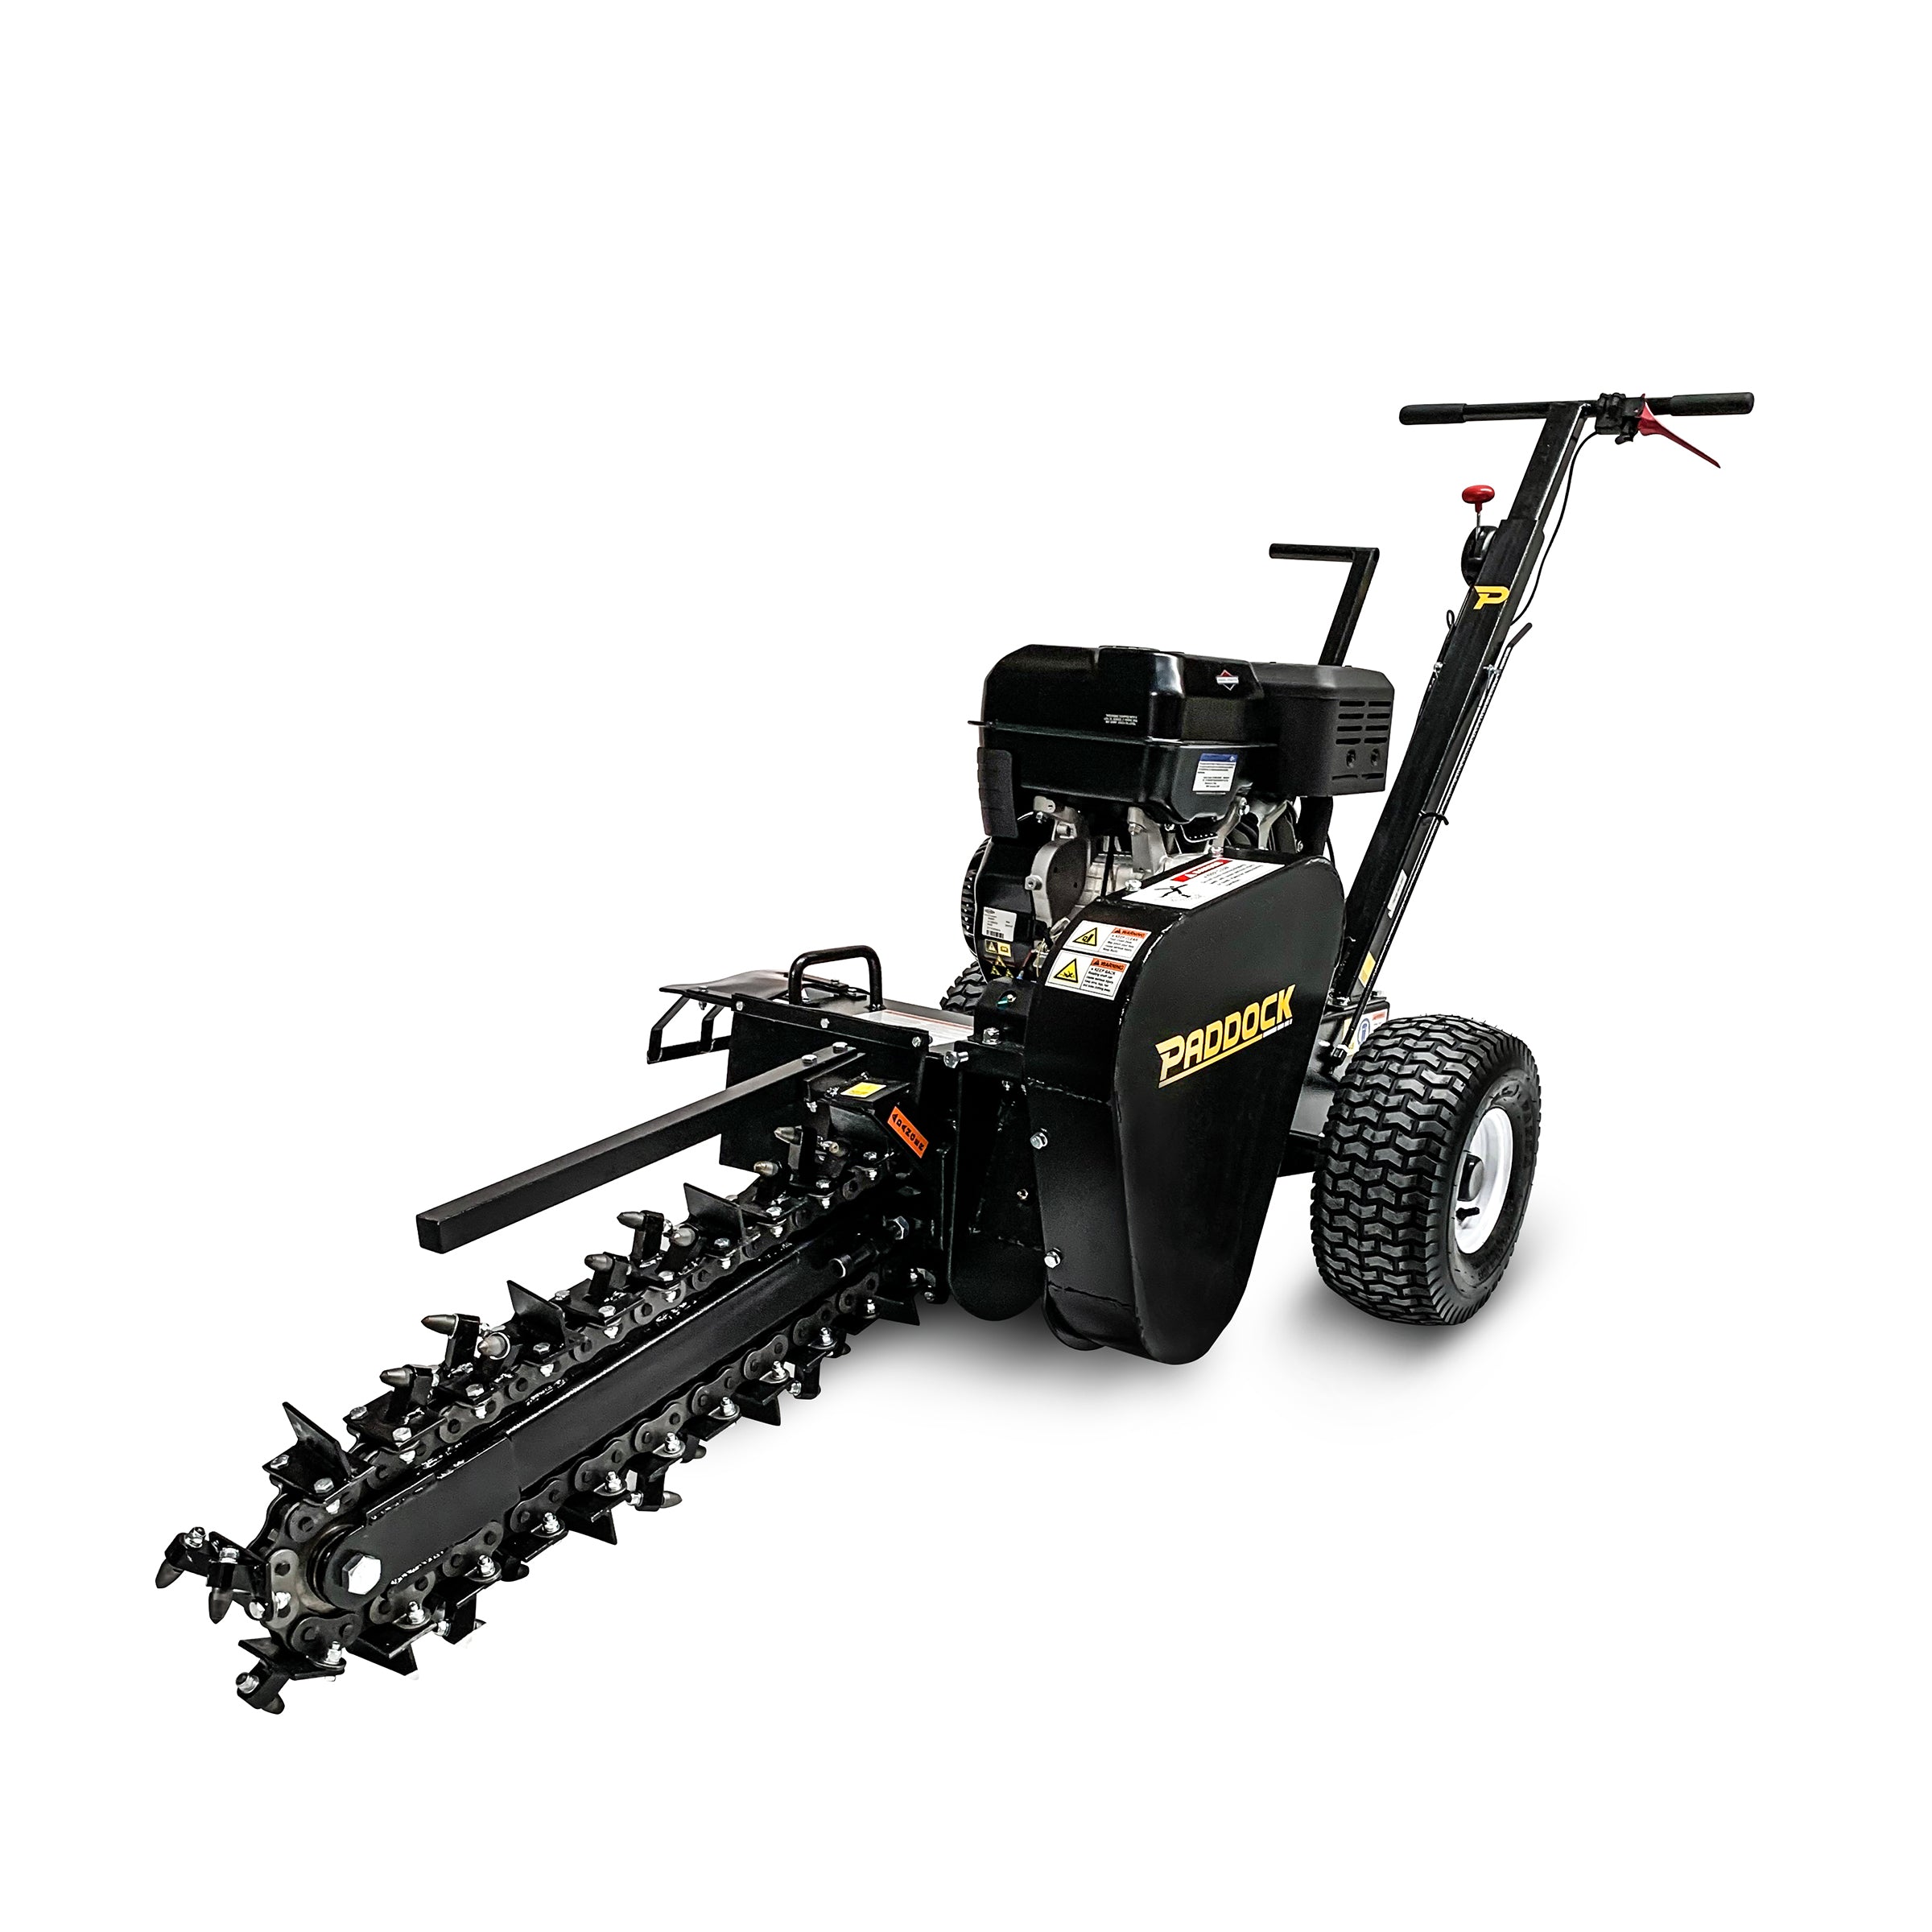 PADDOCK trencher ditch witch